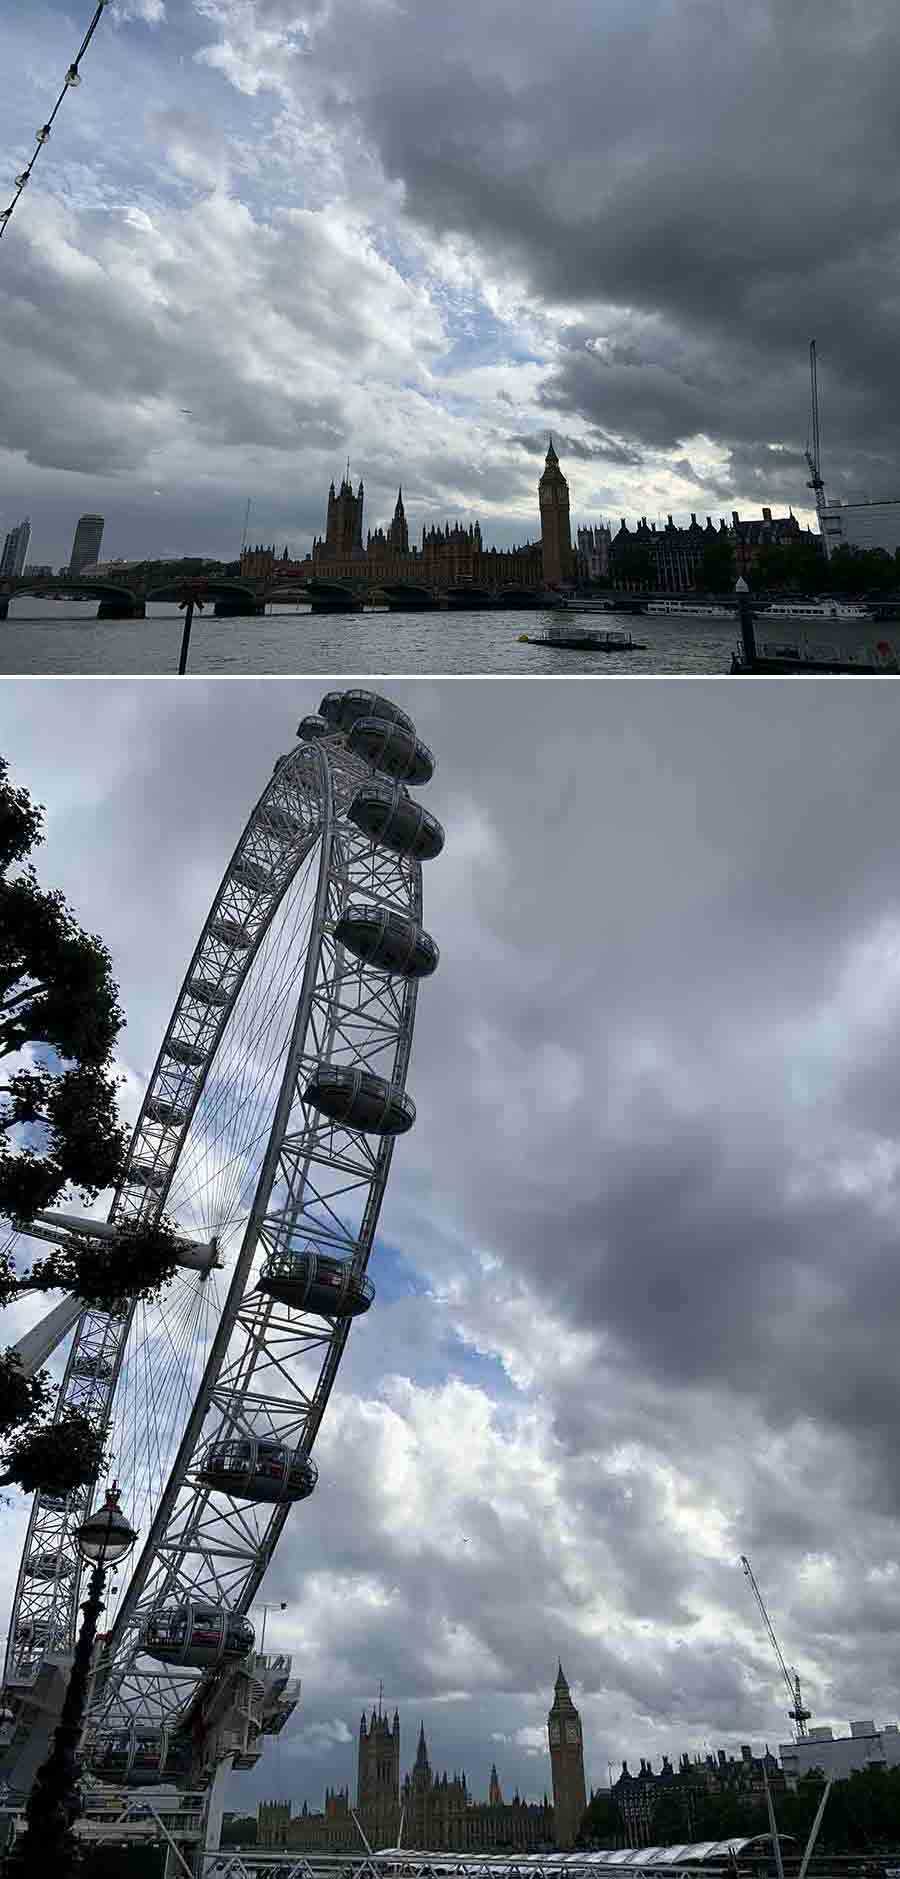 The pictures everyone takes on their first visit to London — the London Eye and the Big Ben. I walked a lot, ate various kinds of food, saw structures I had read about or seen on screen, caught up with old friends and made a few new ones. At the end of my two weeks in the city, I wished I had more time there and promised myself I’d be back